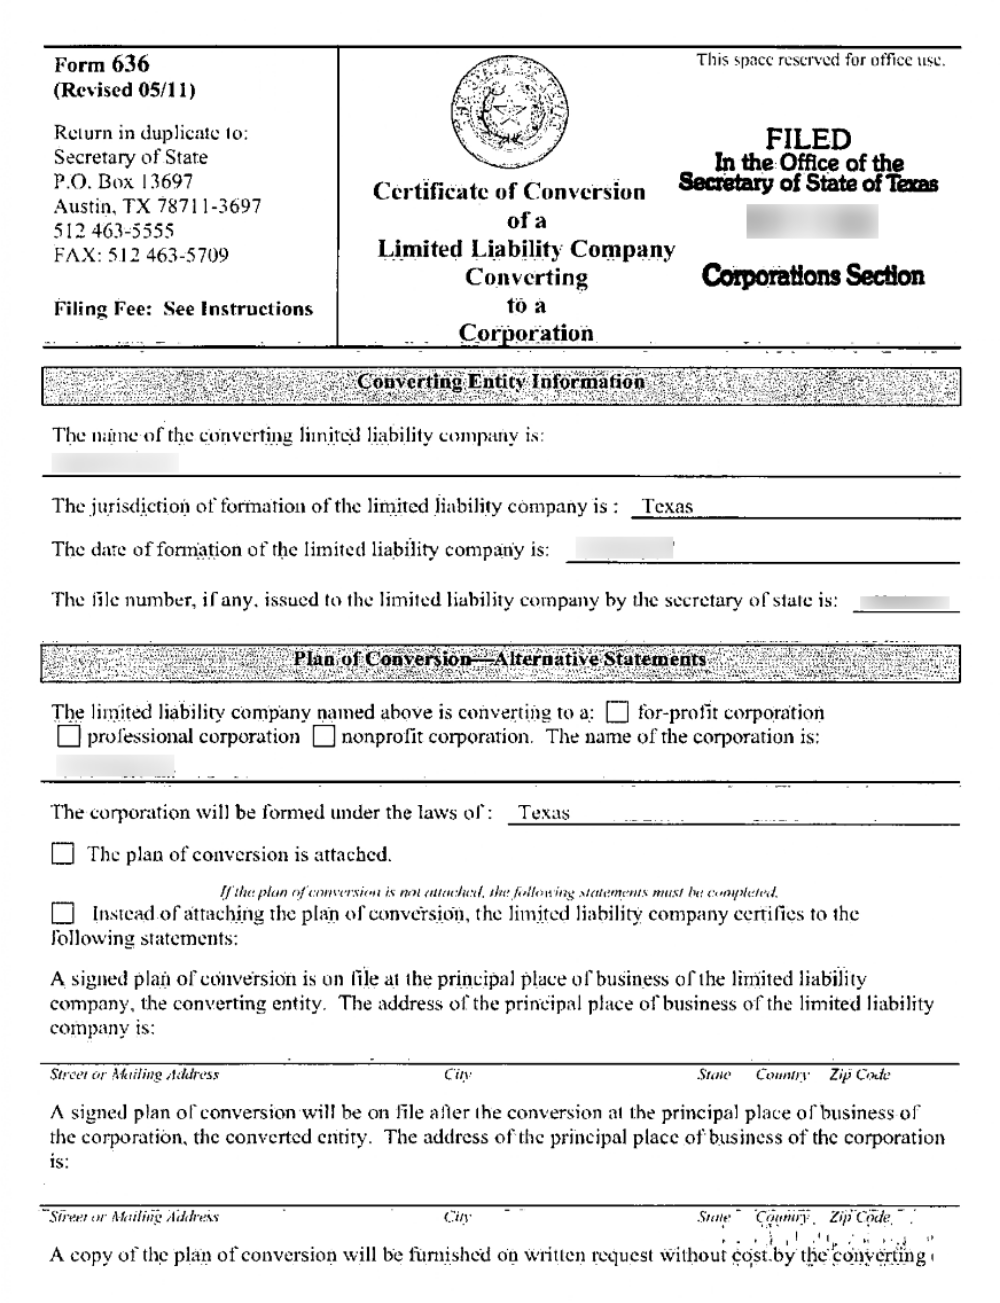 Certificate of Conversion Page 1